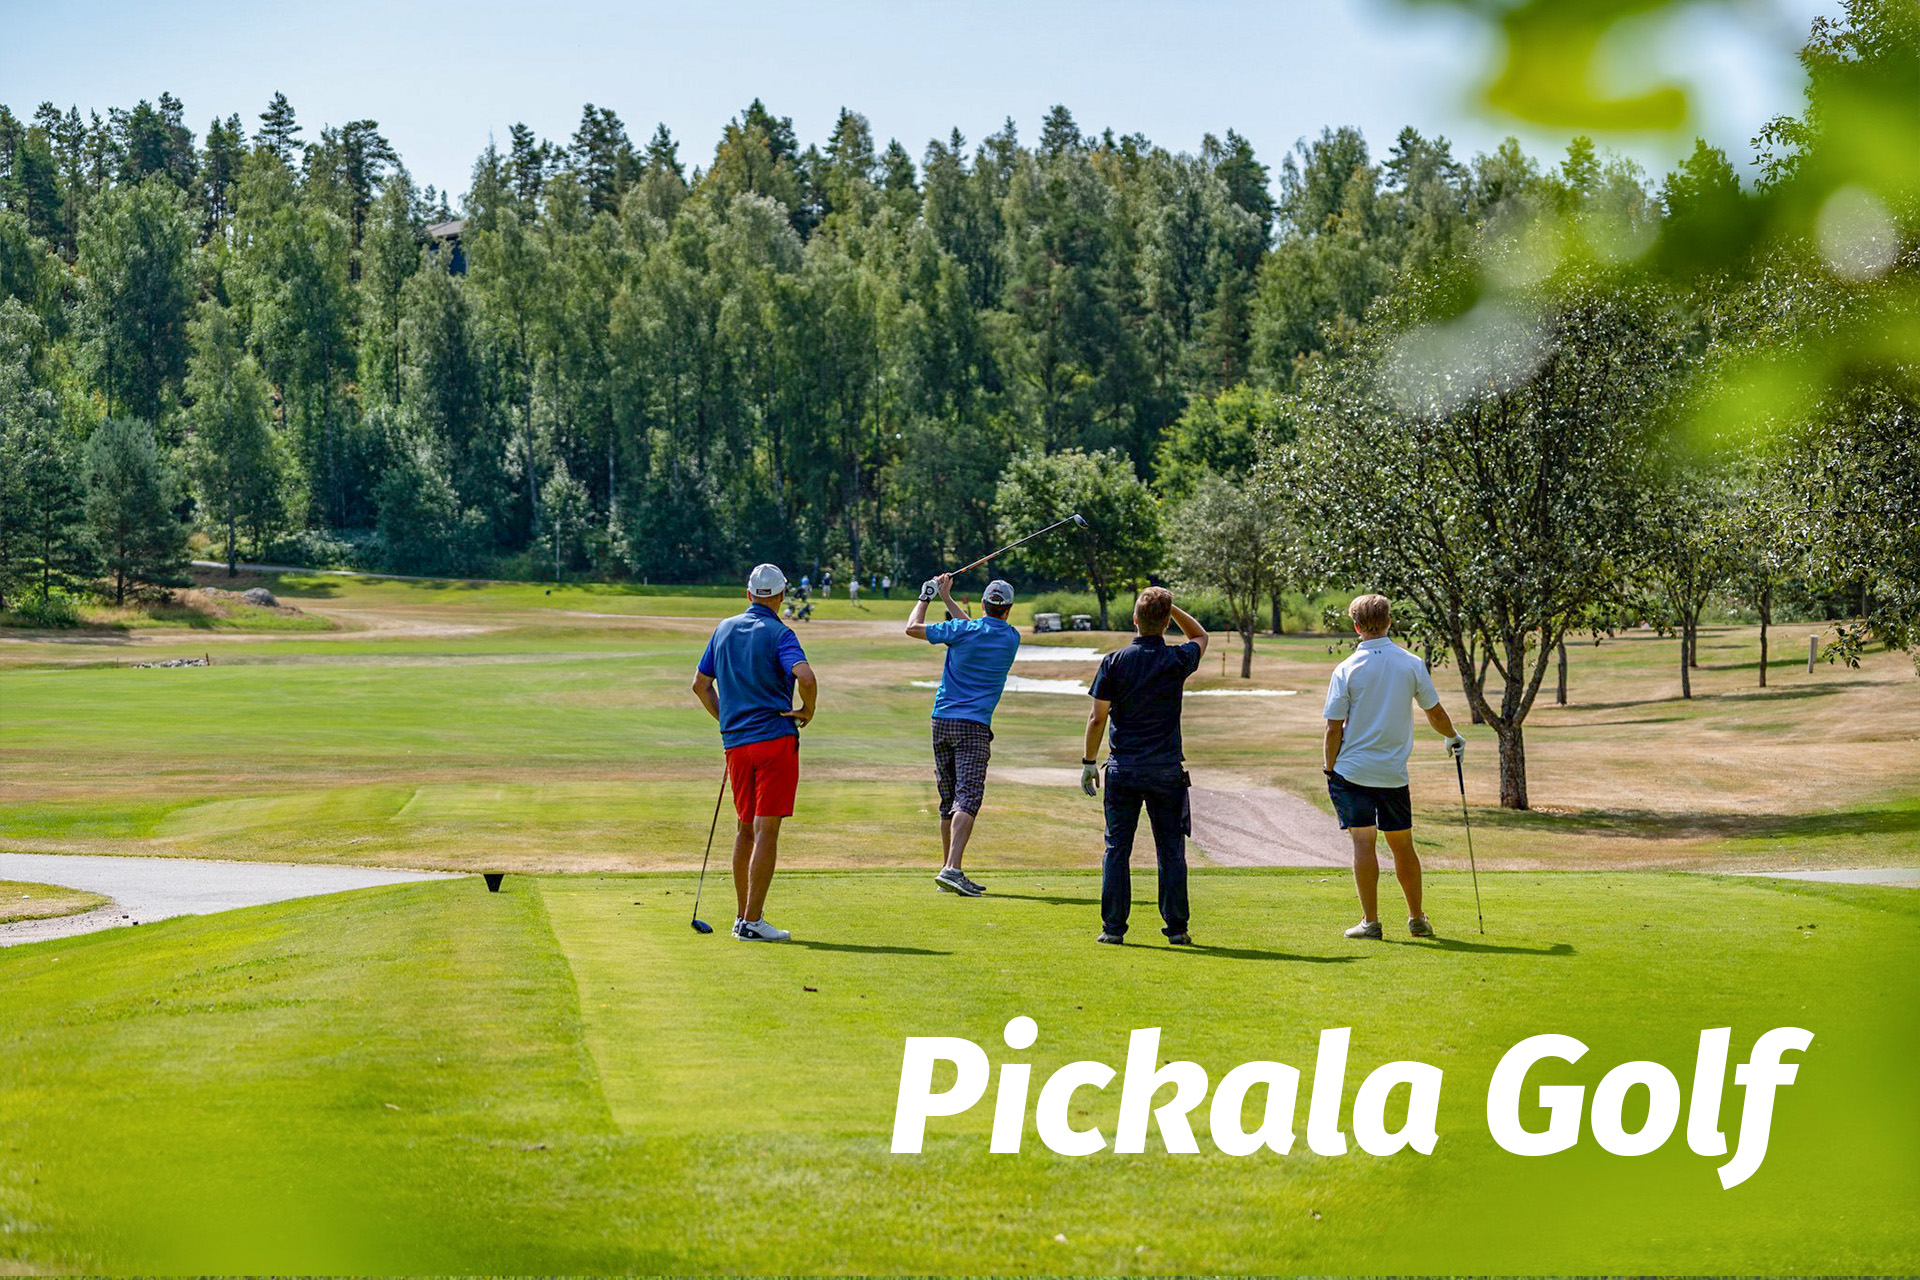 Enjoy your stay in Espoo playing golf at Pickala Golf.